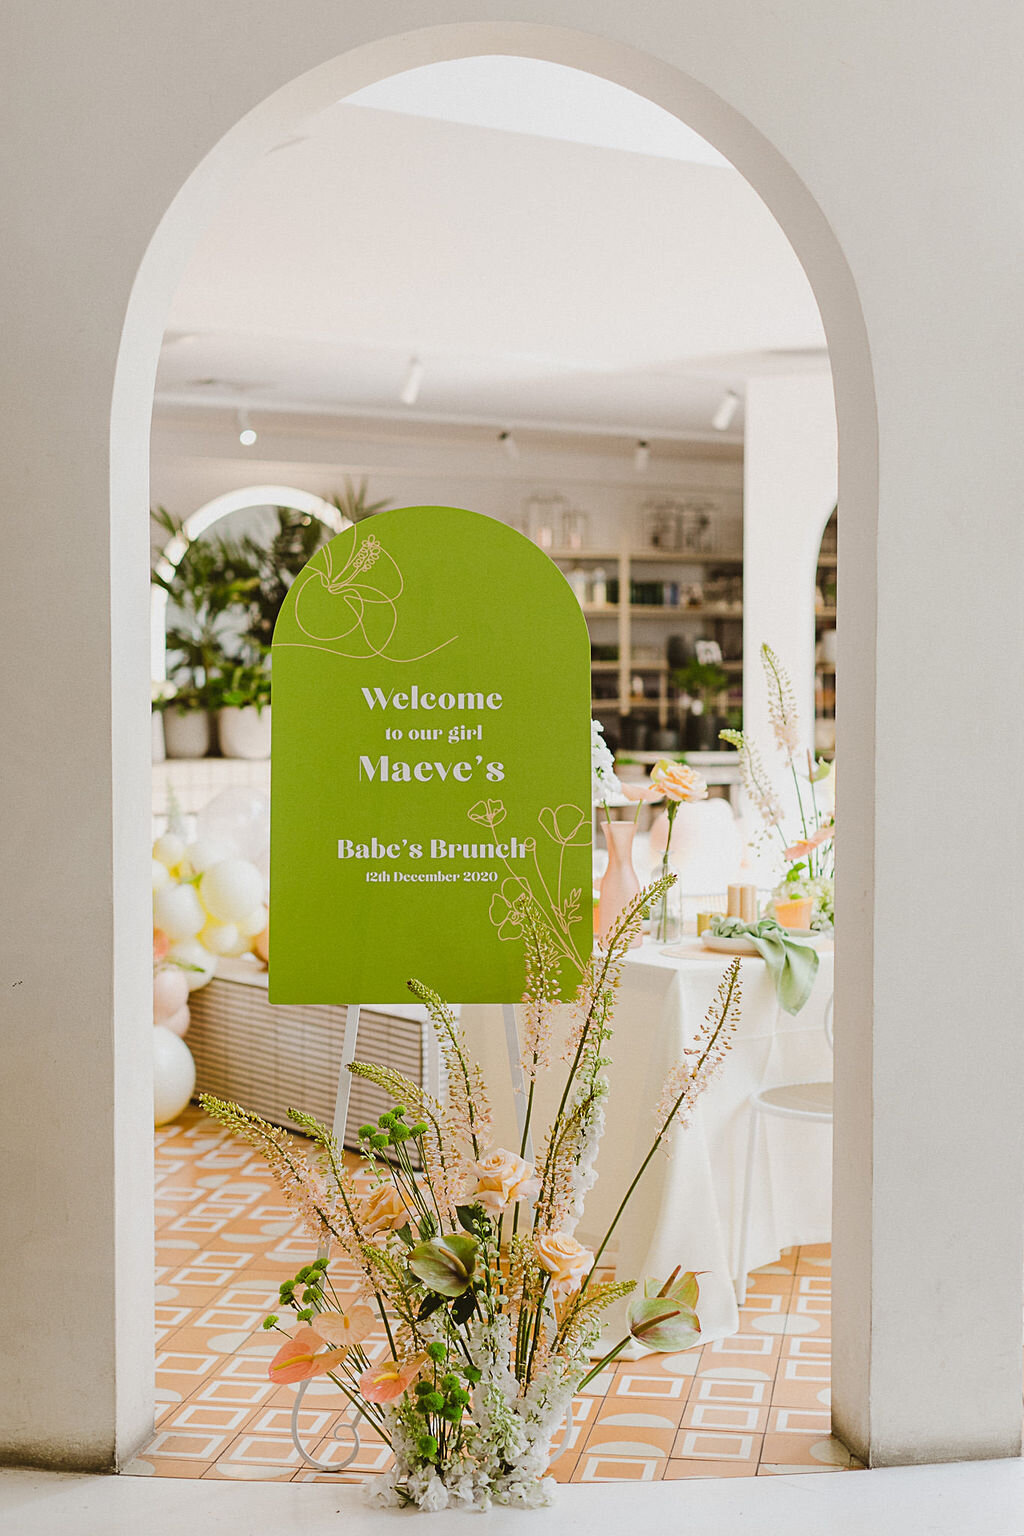 A arch entrance to a dining area, with a green welcome sign and bright, tall florals in front. In the backgorund there are dressed tables and a balloon garland. Welcome to our girl’s Maeve’s super fun and fresh bridal babe’s brunch! With Zoobibi’s art deco and Middle Eastern vibes, the space is filled with light and curved arches to make a grand entrance. 